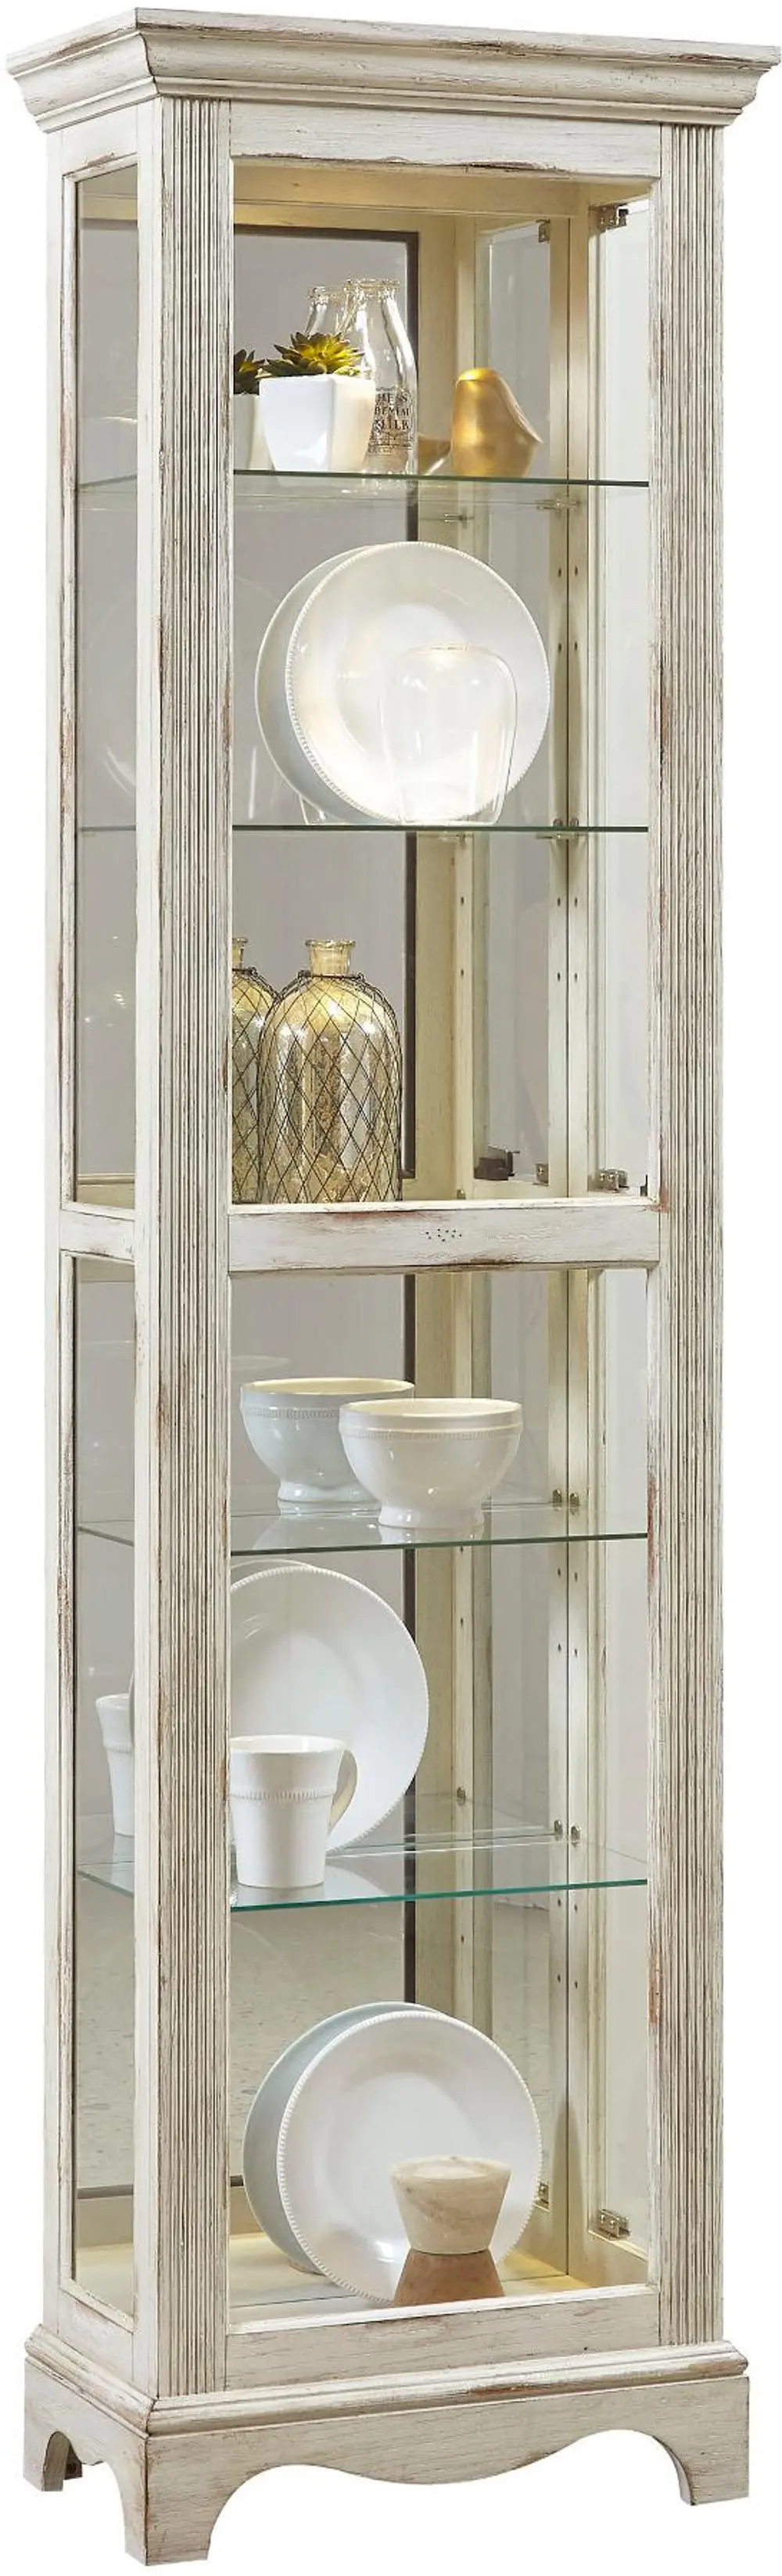 Weathered White Curio Cabinet-1